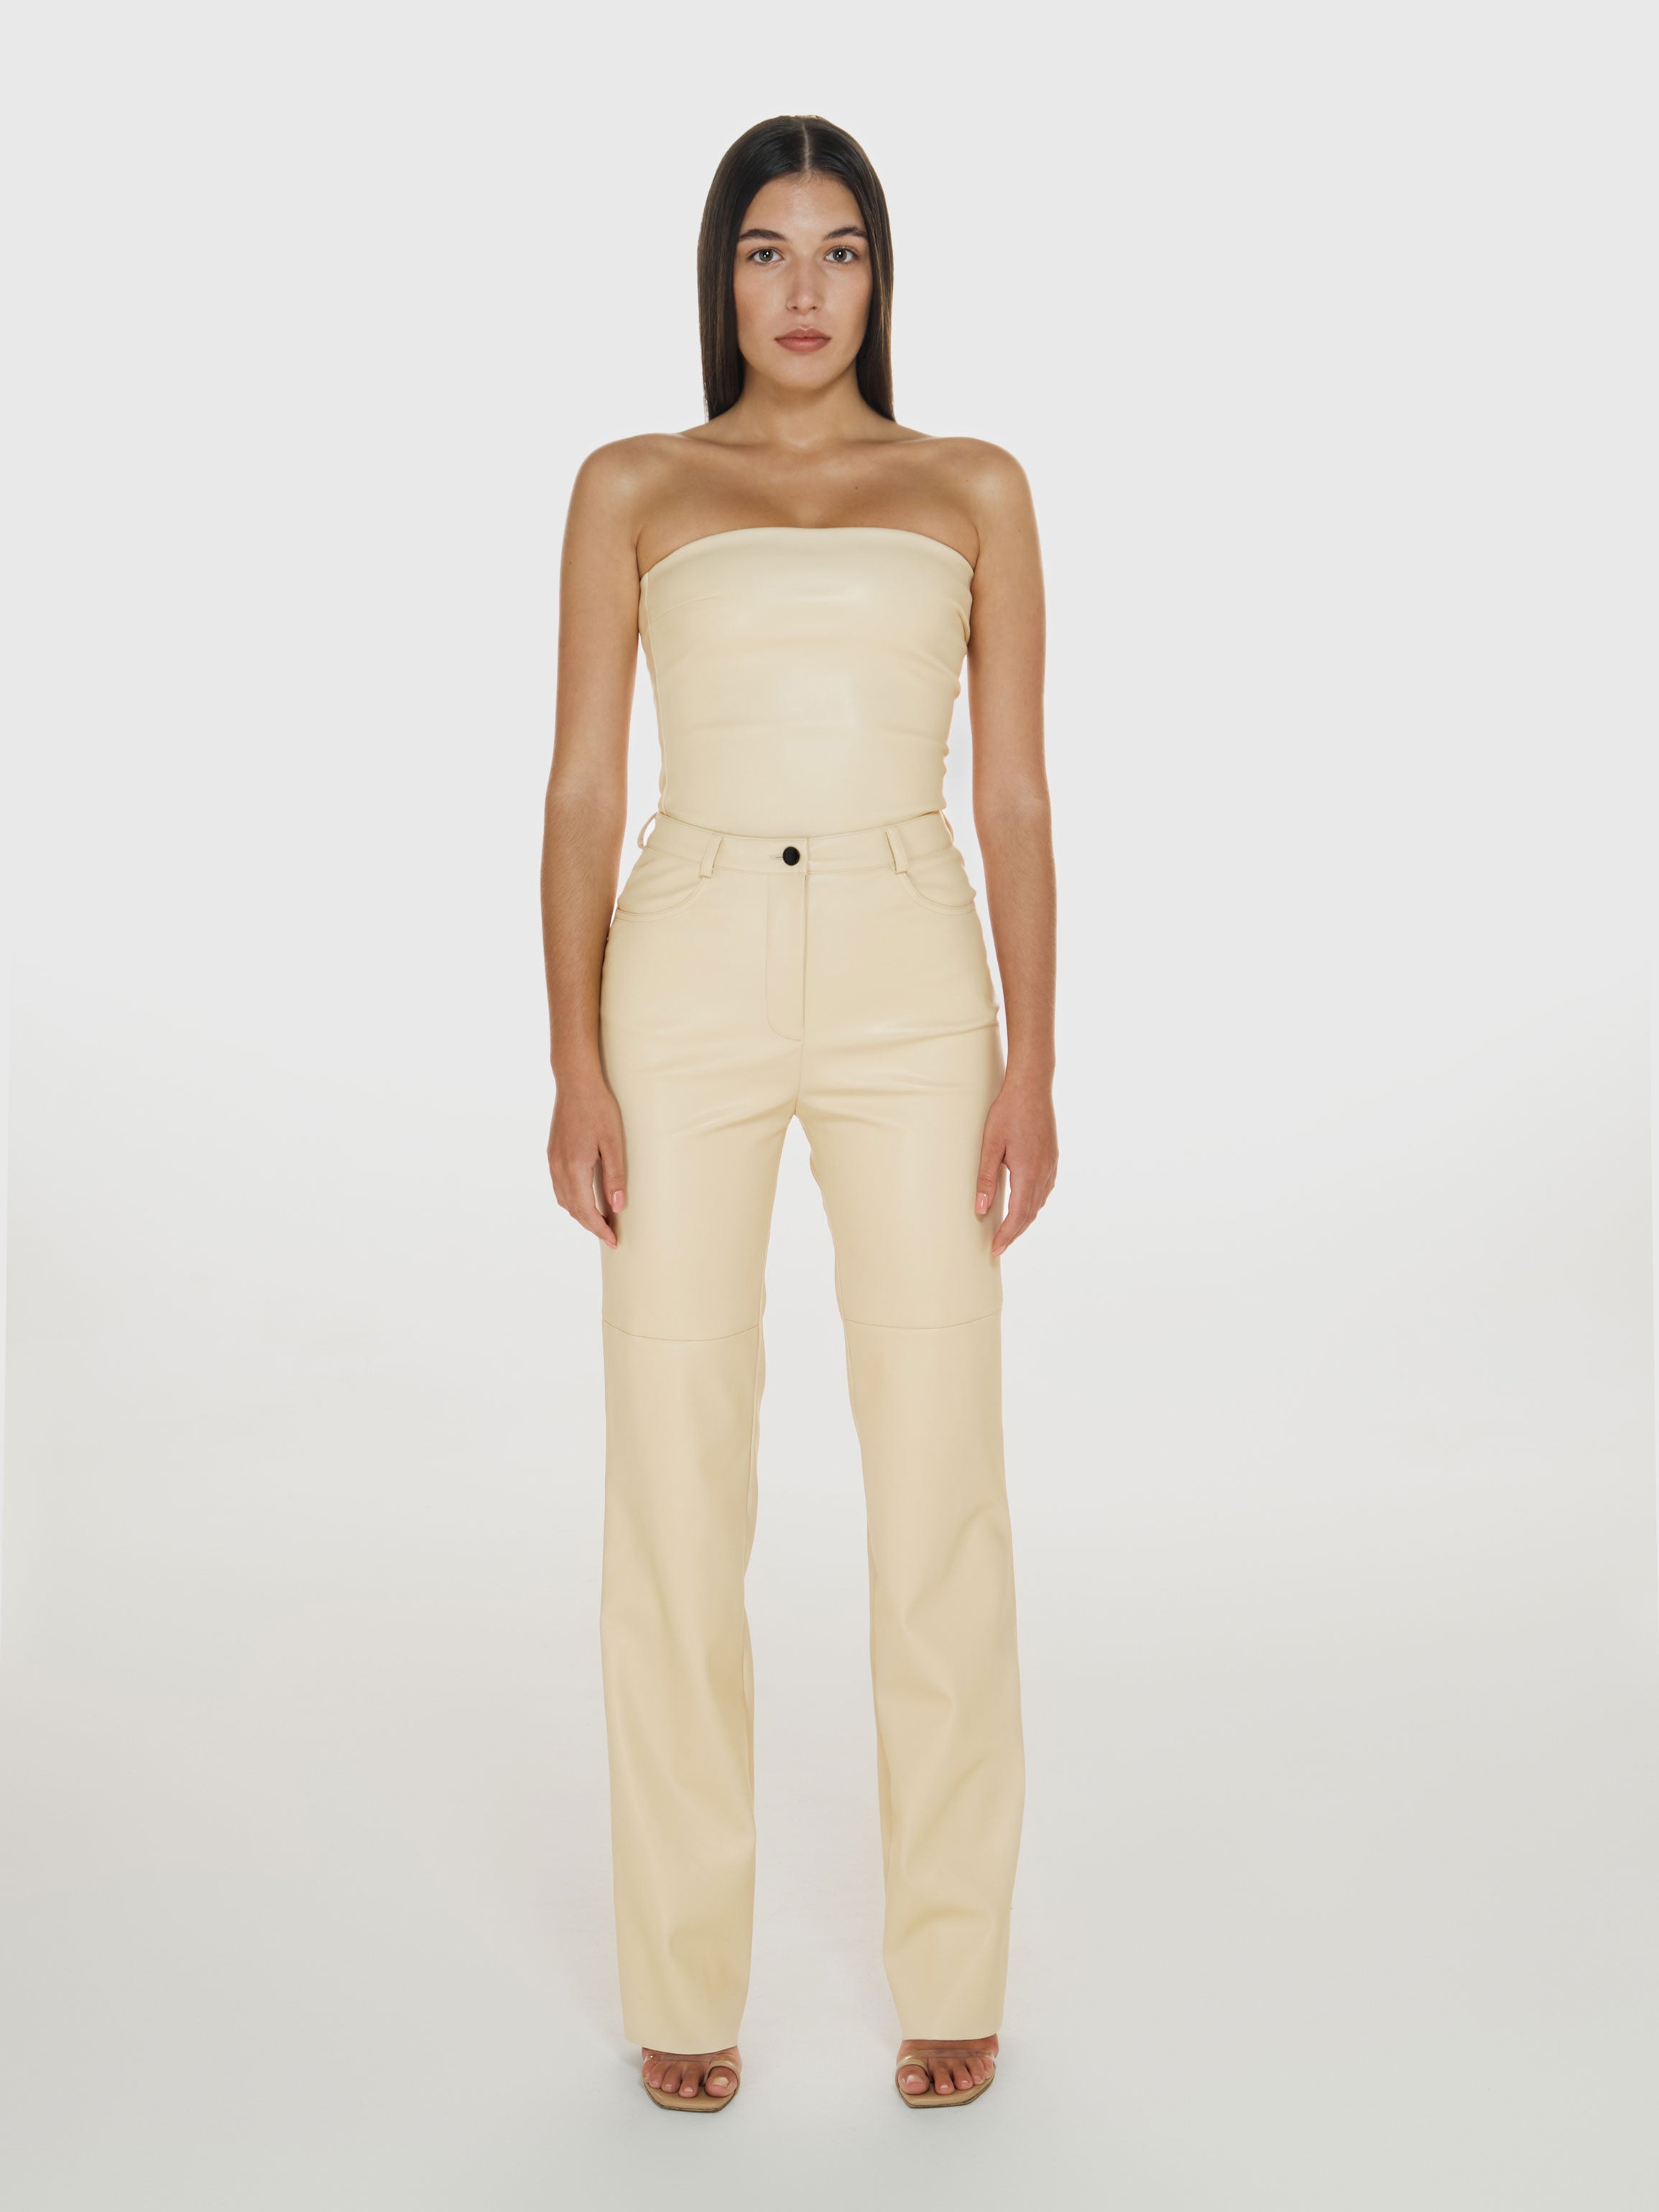 Full shot of a girl in a cream vegan leather tube top and cream vegan leather high rise straight leg pants